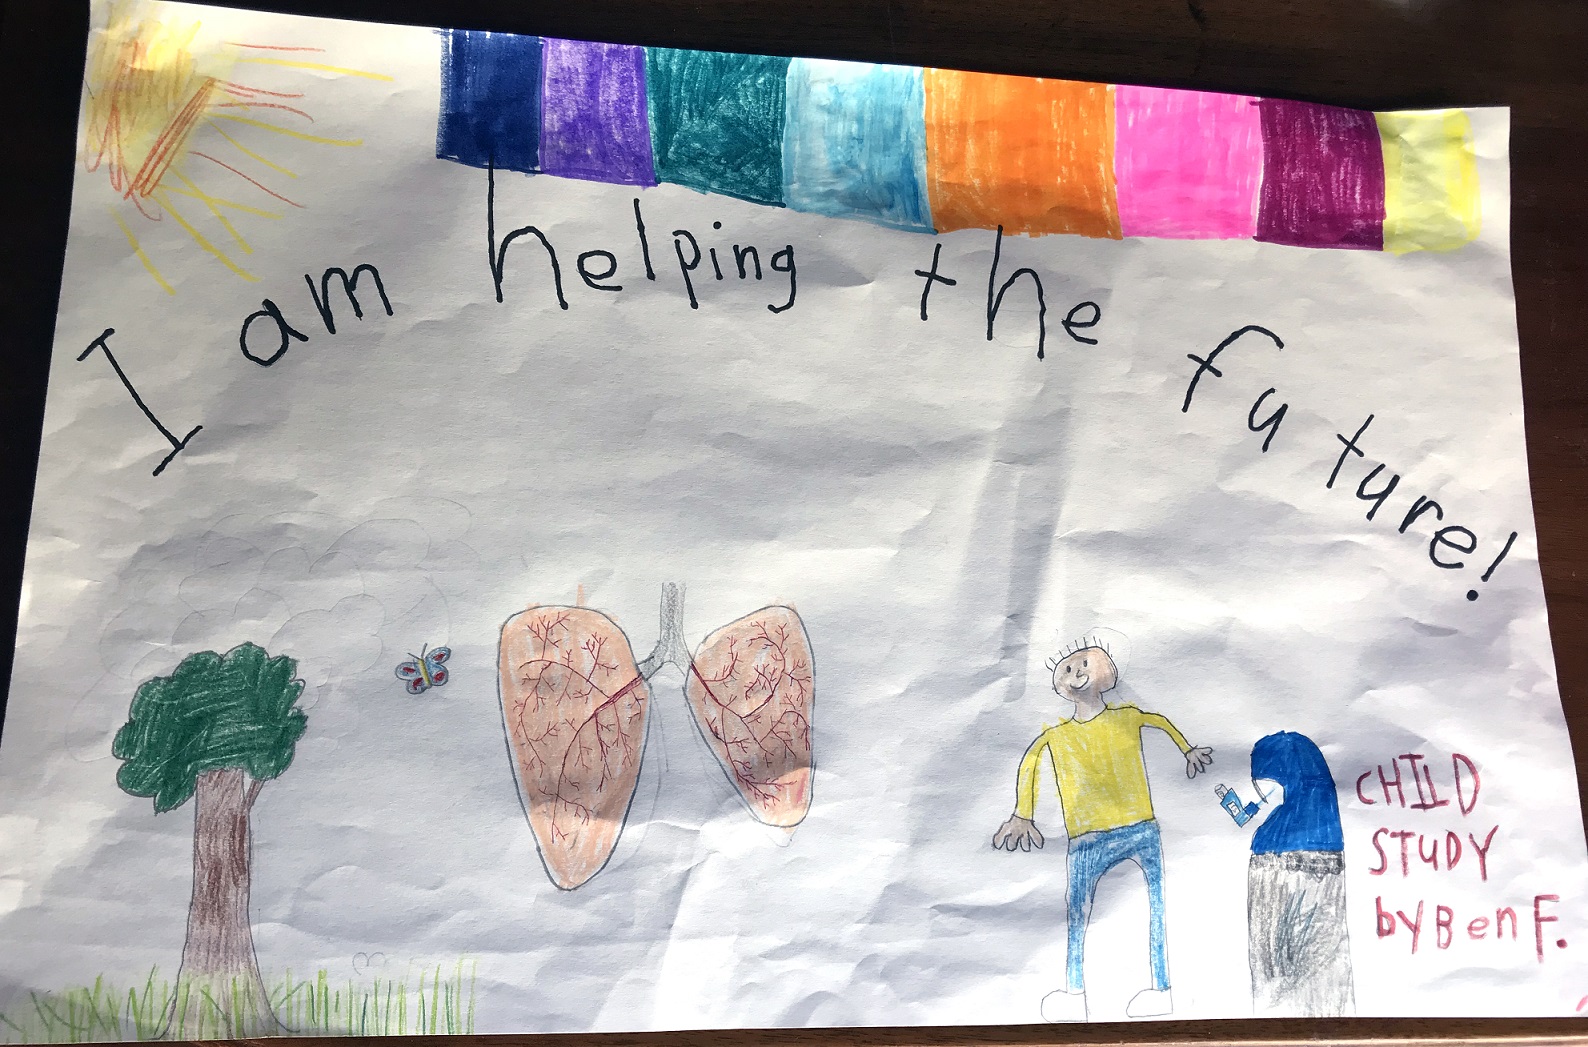 A Child Helping Others drawing free image download